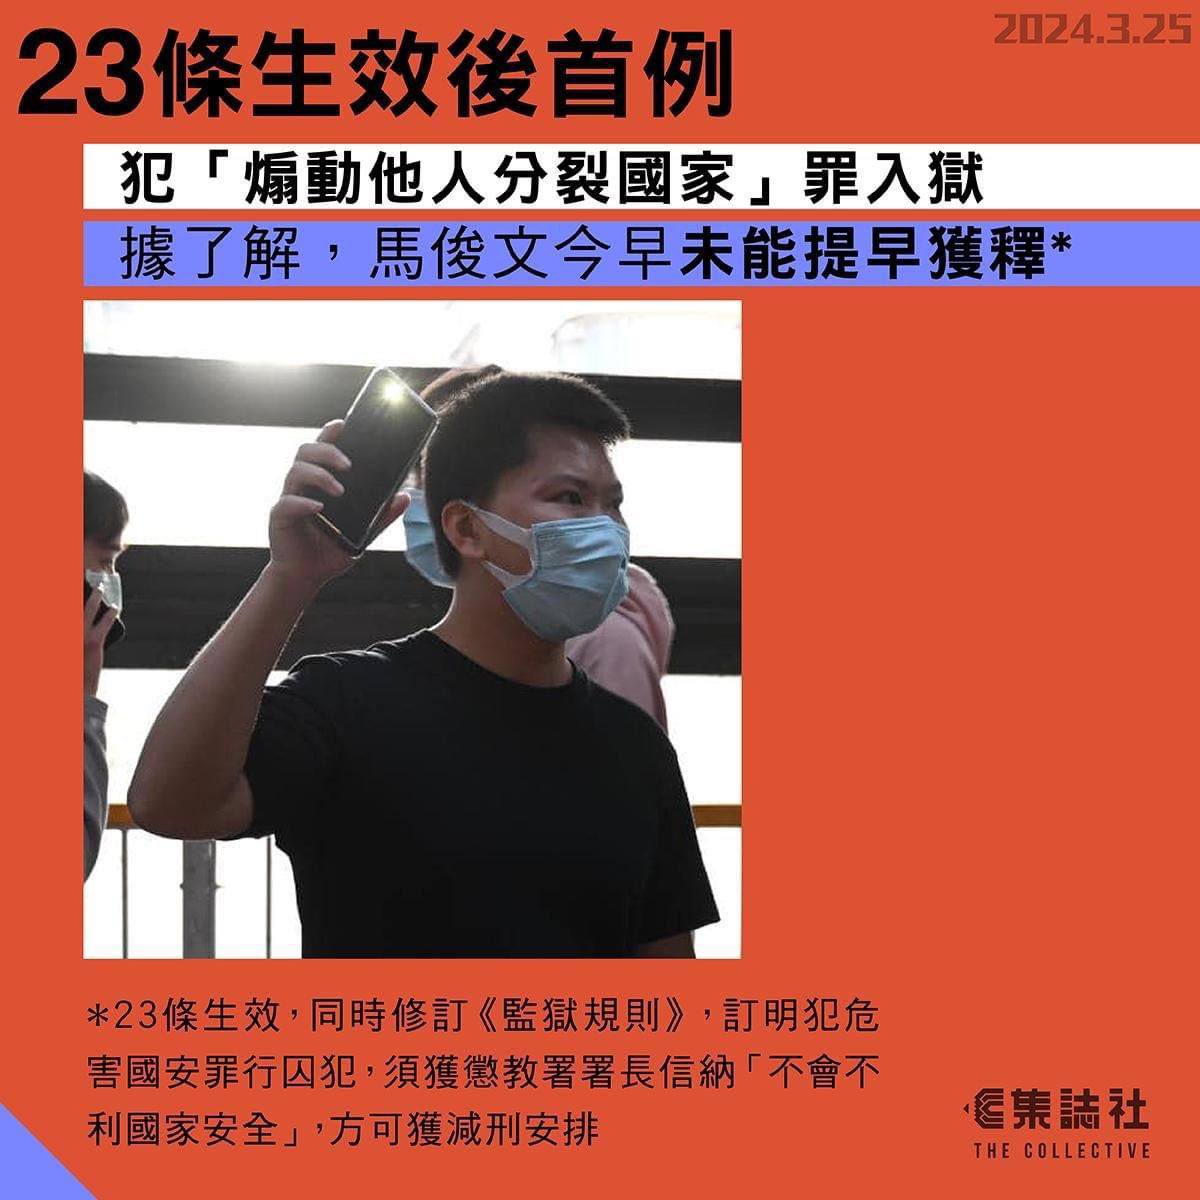 First person affected by #Article23: #MaChunMan was due to be released from prison today but didn’t appear. New prison rules under A23 say prisons director must be satisfied release won’t “endanger national security.”